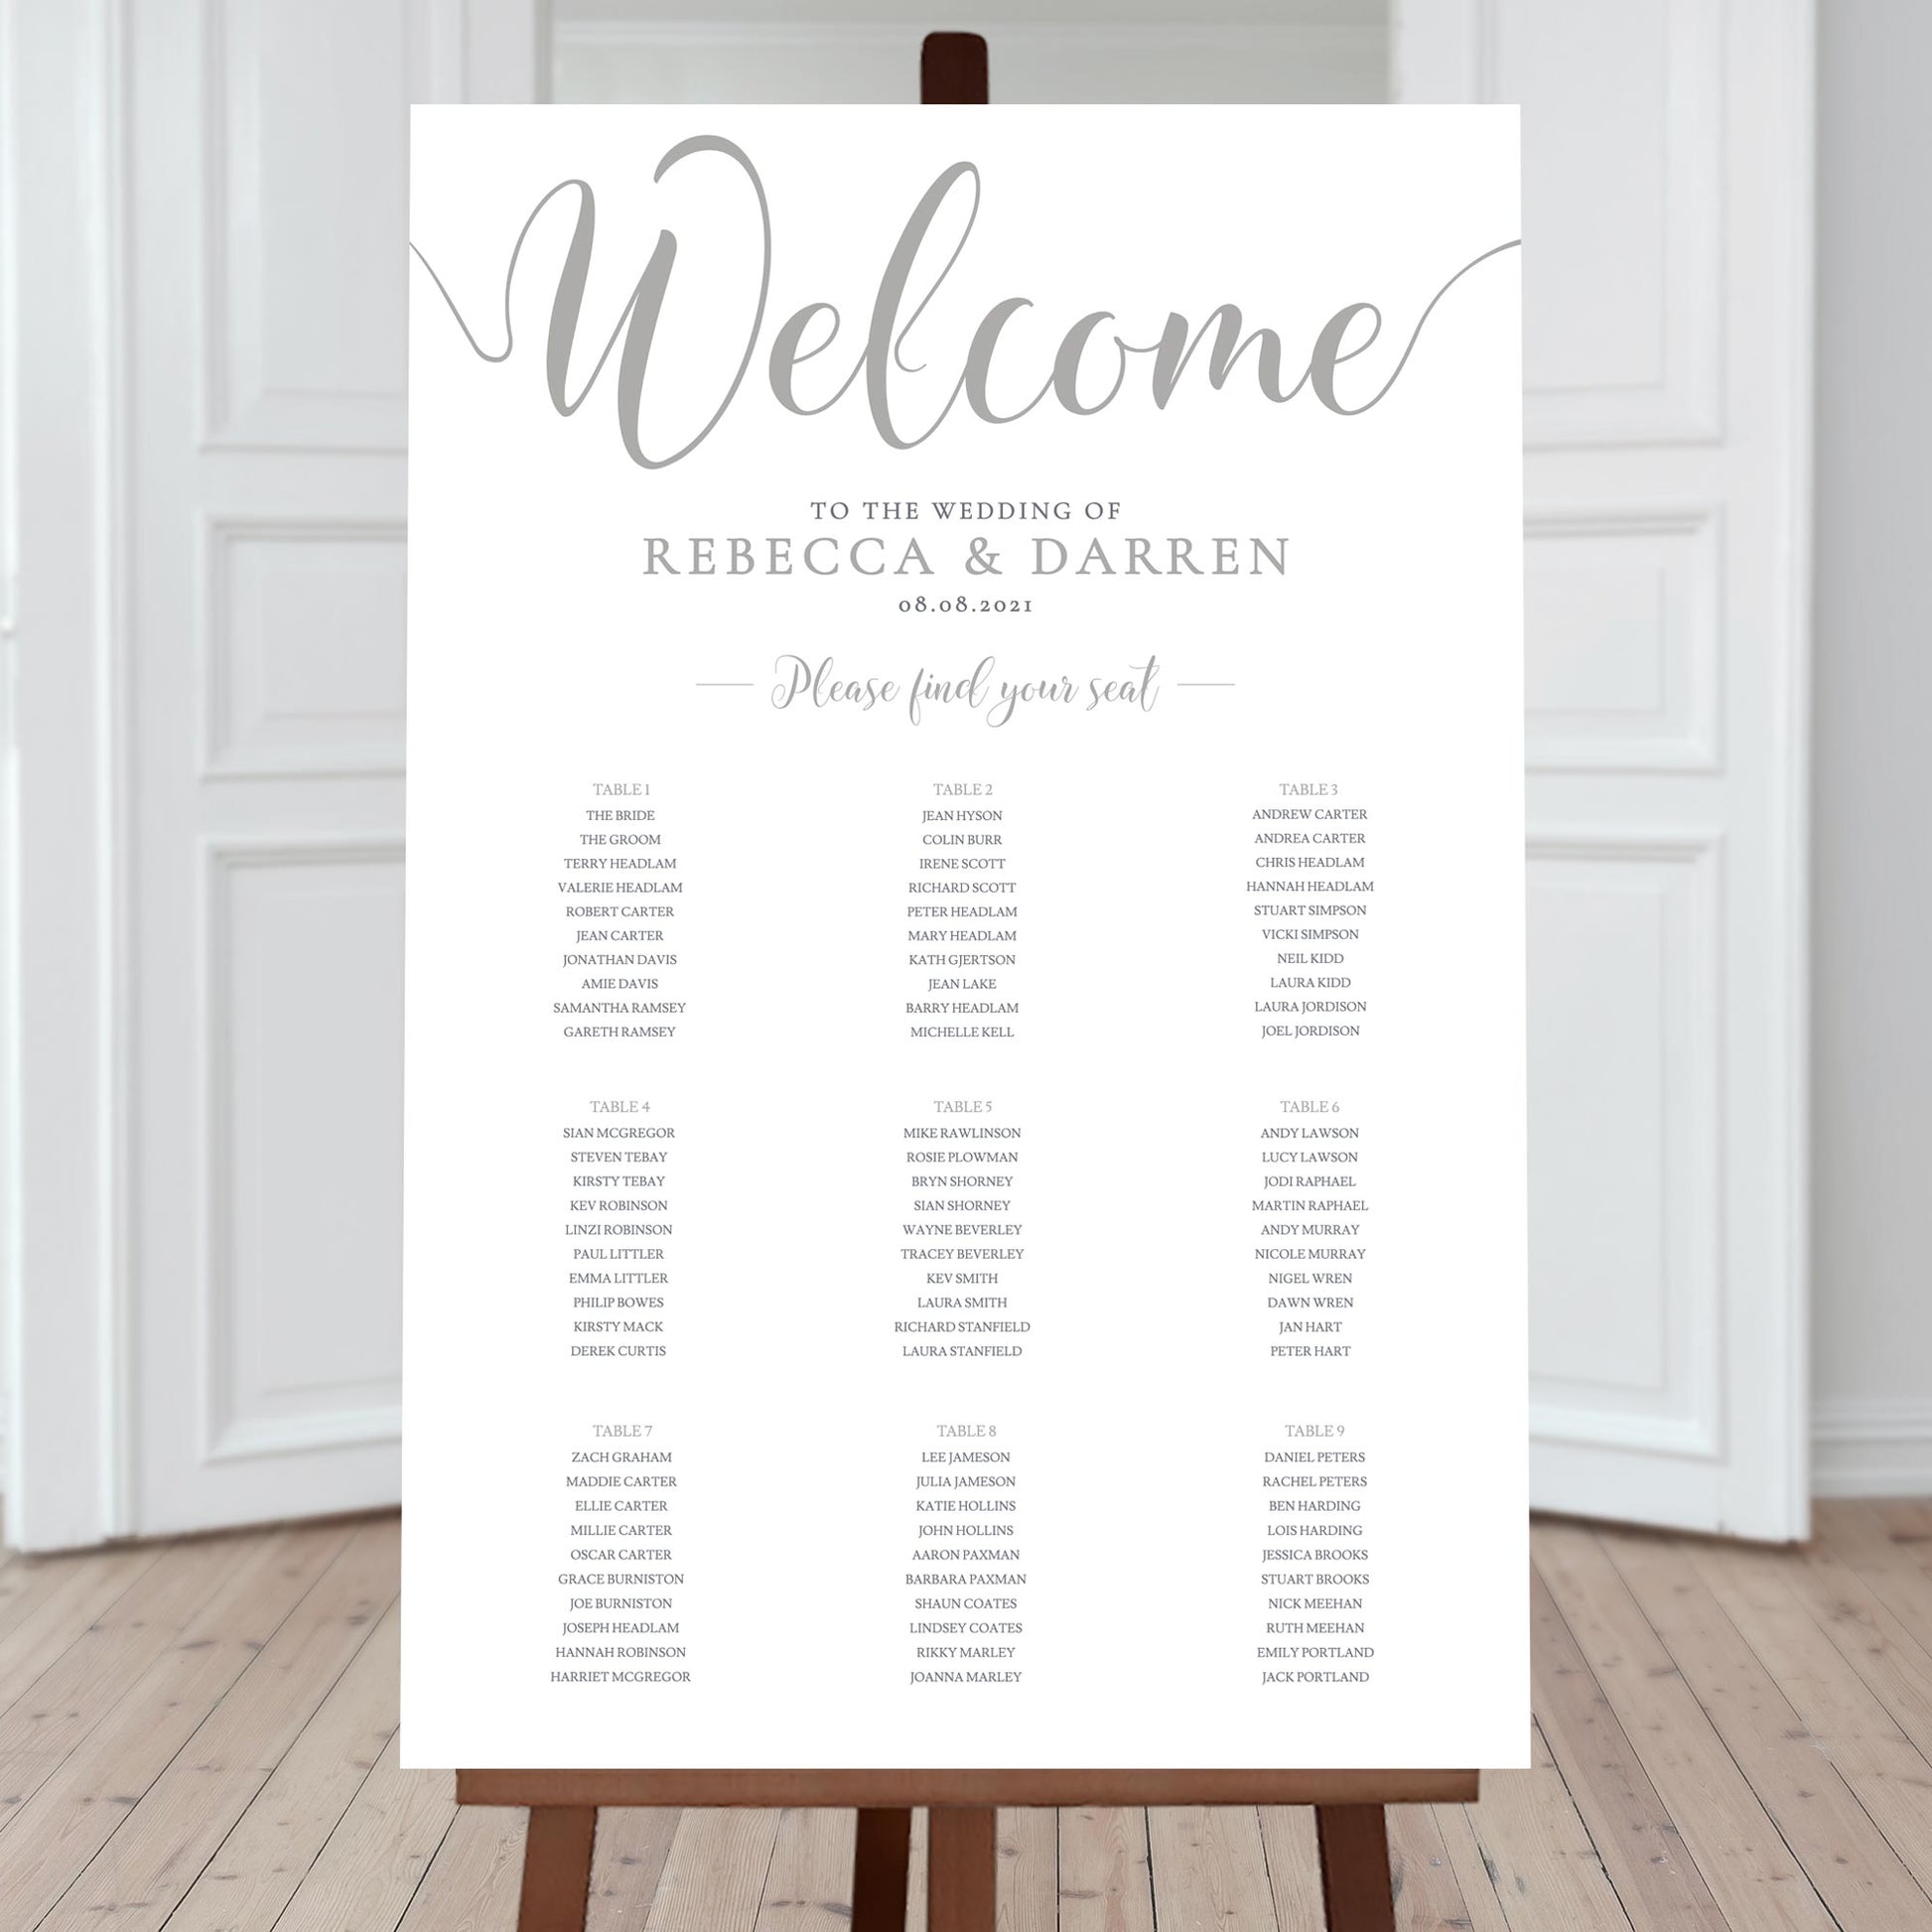 9 table silver seating chart at wedding reception